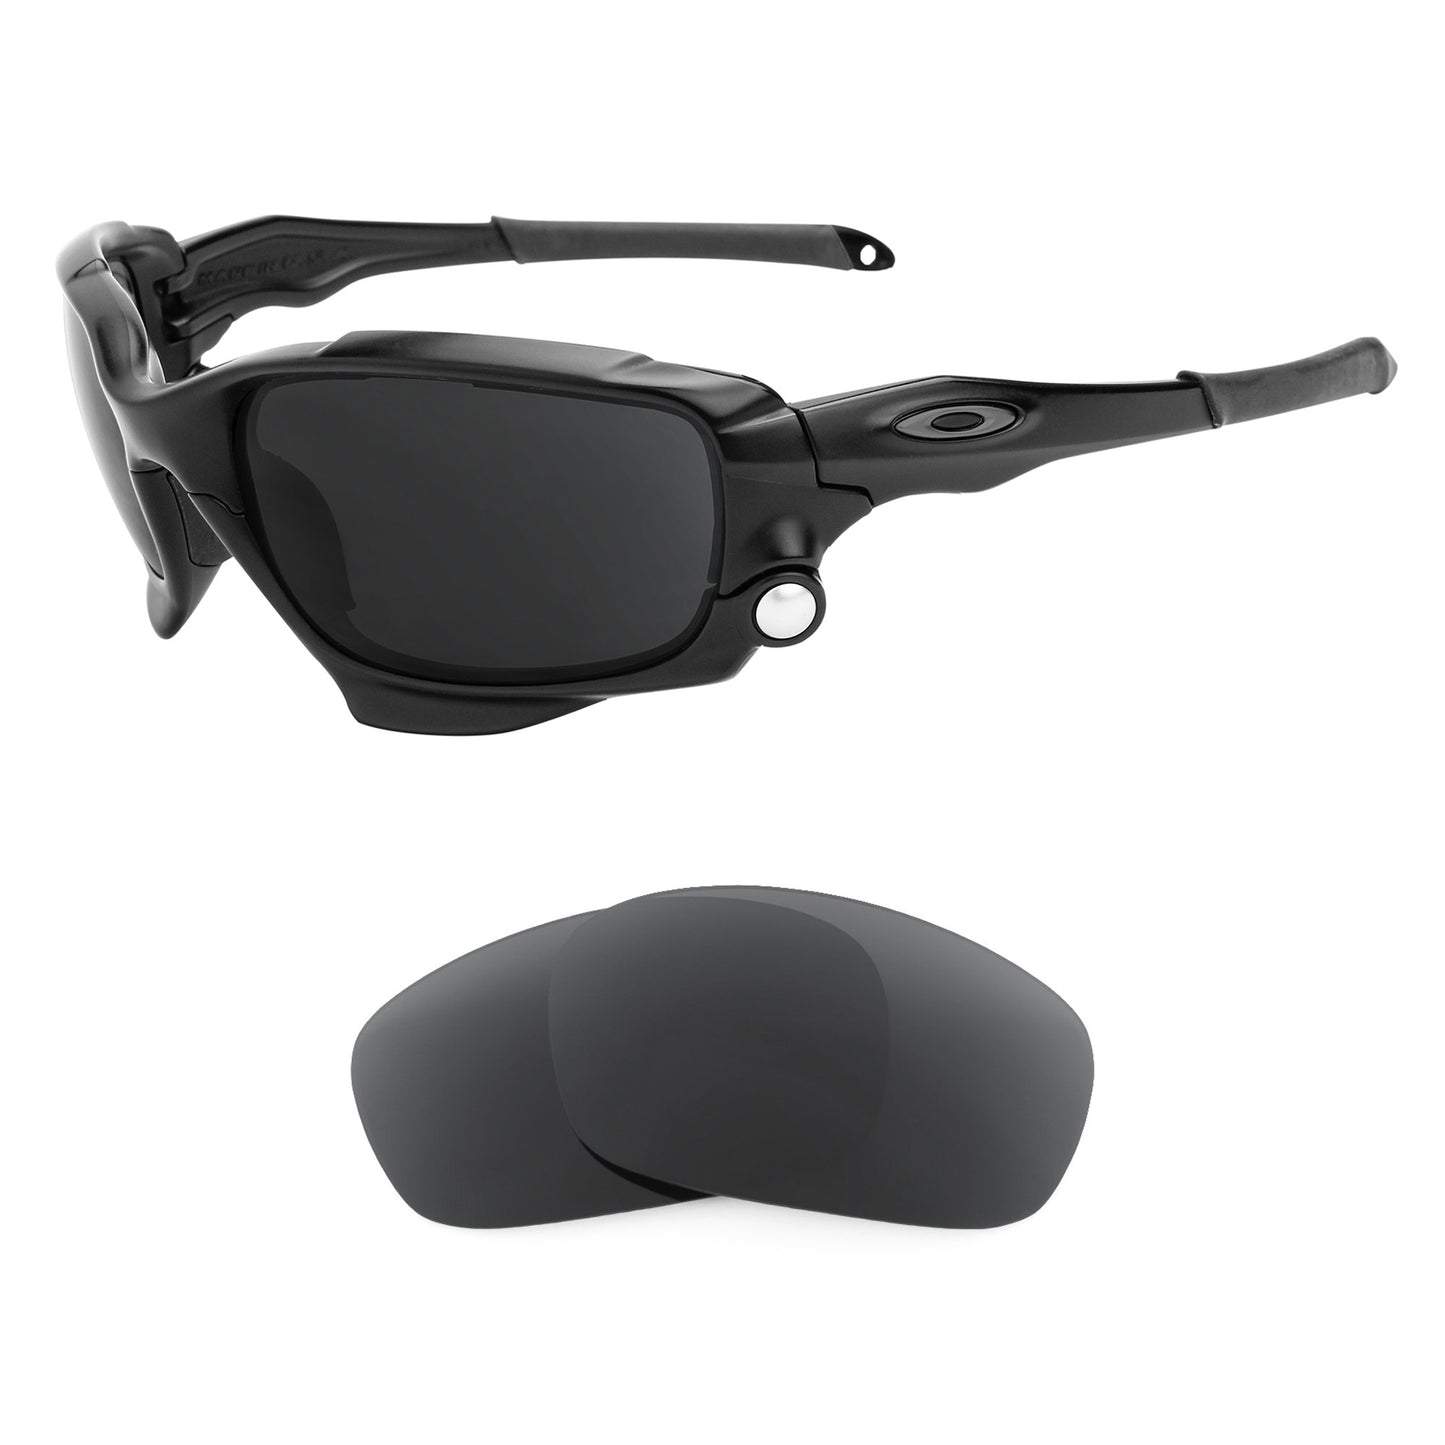 Oakley Racing Jacket (Low Bridge Fit) sunglasses with replacement lenses